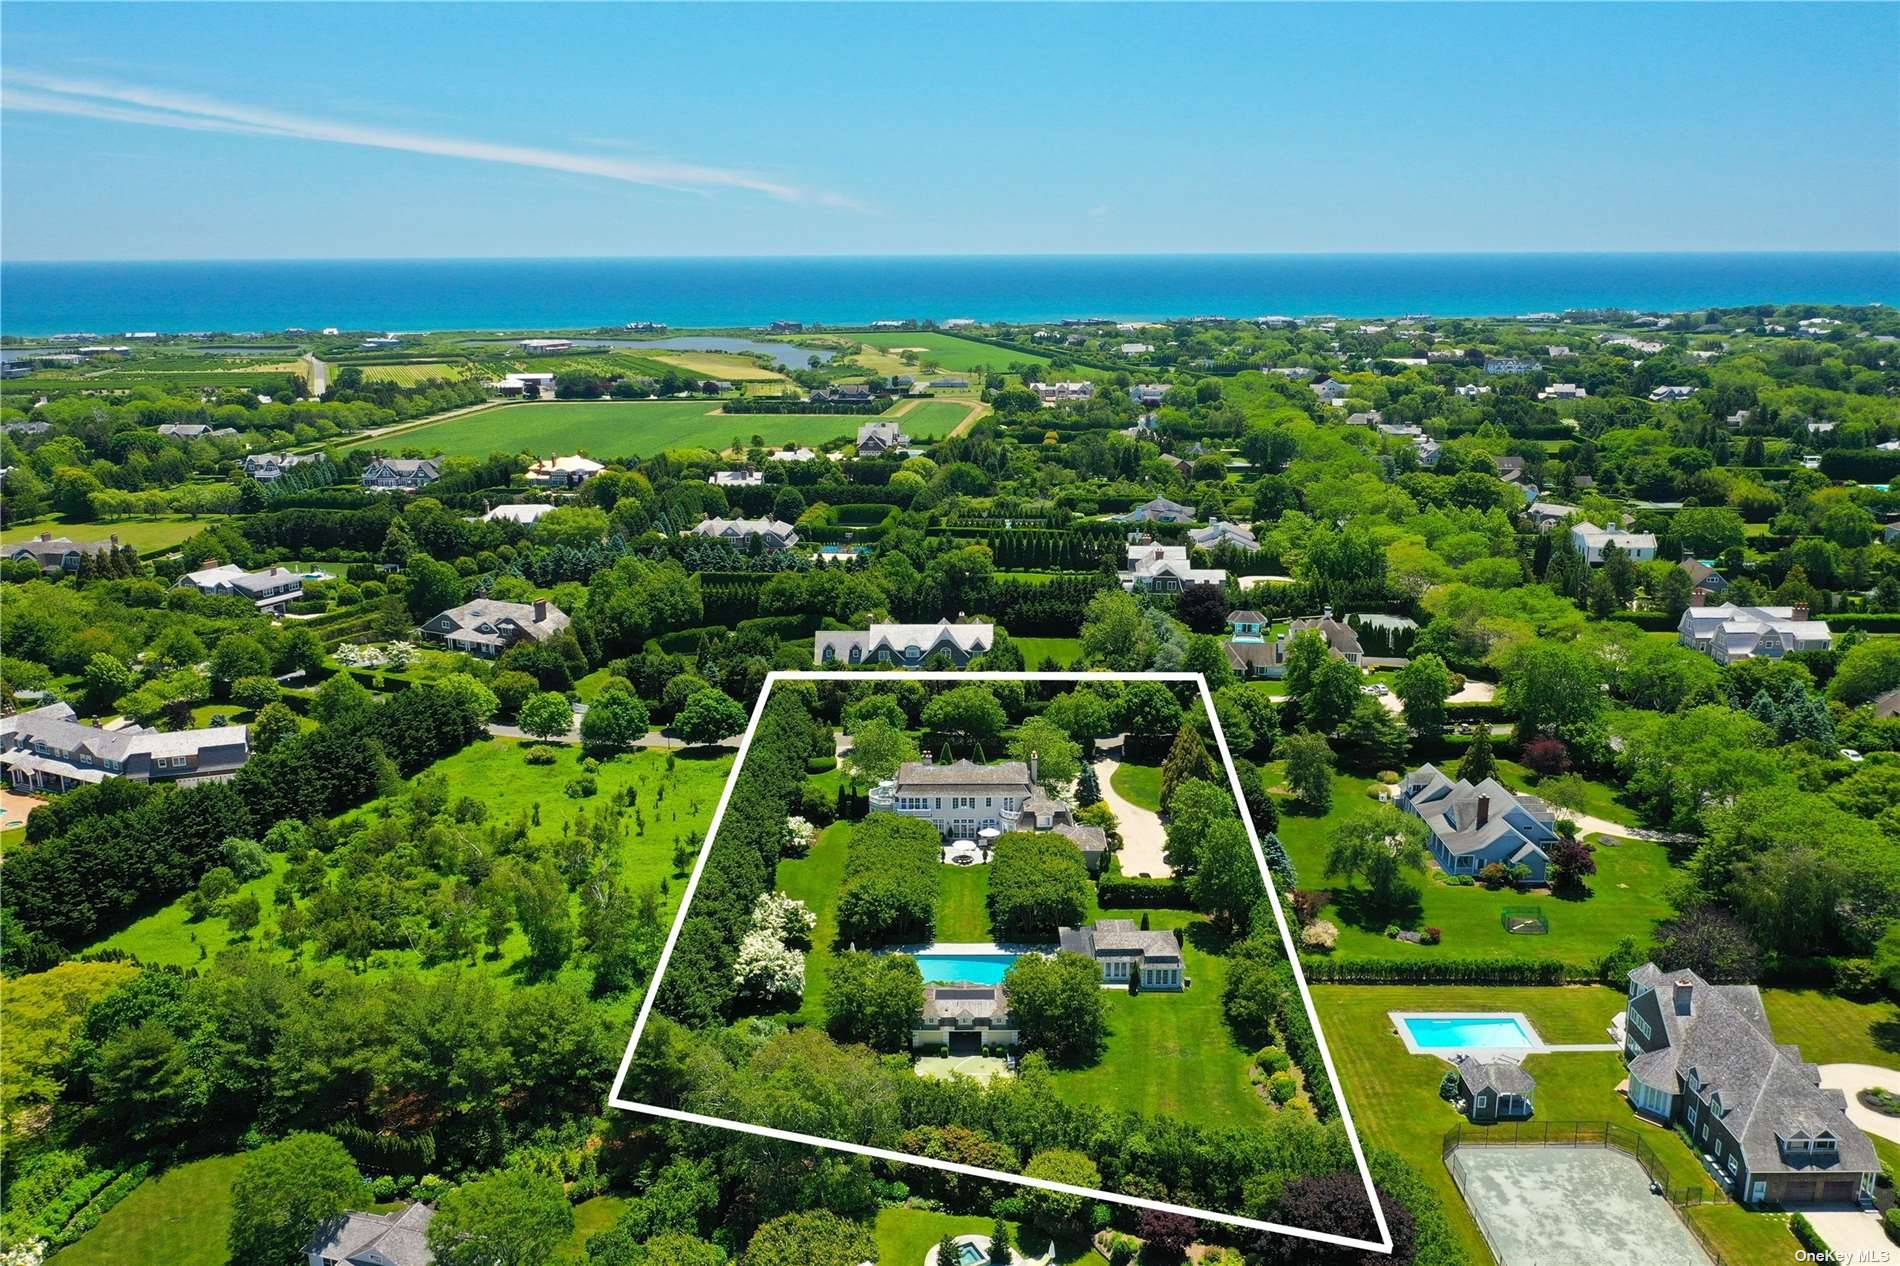 Tucked away in the heart of Southampton Village, in a highly sought after location just minutes from Main St, it's critically acclaimed restaurants and world renowned Ocean beaches is where ...